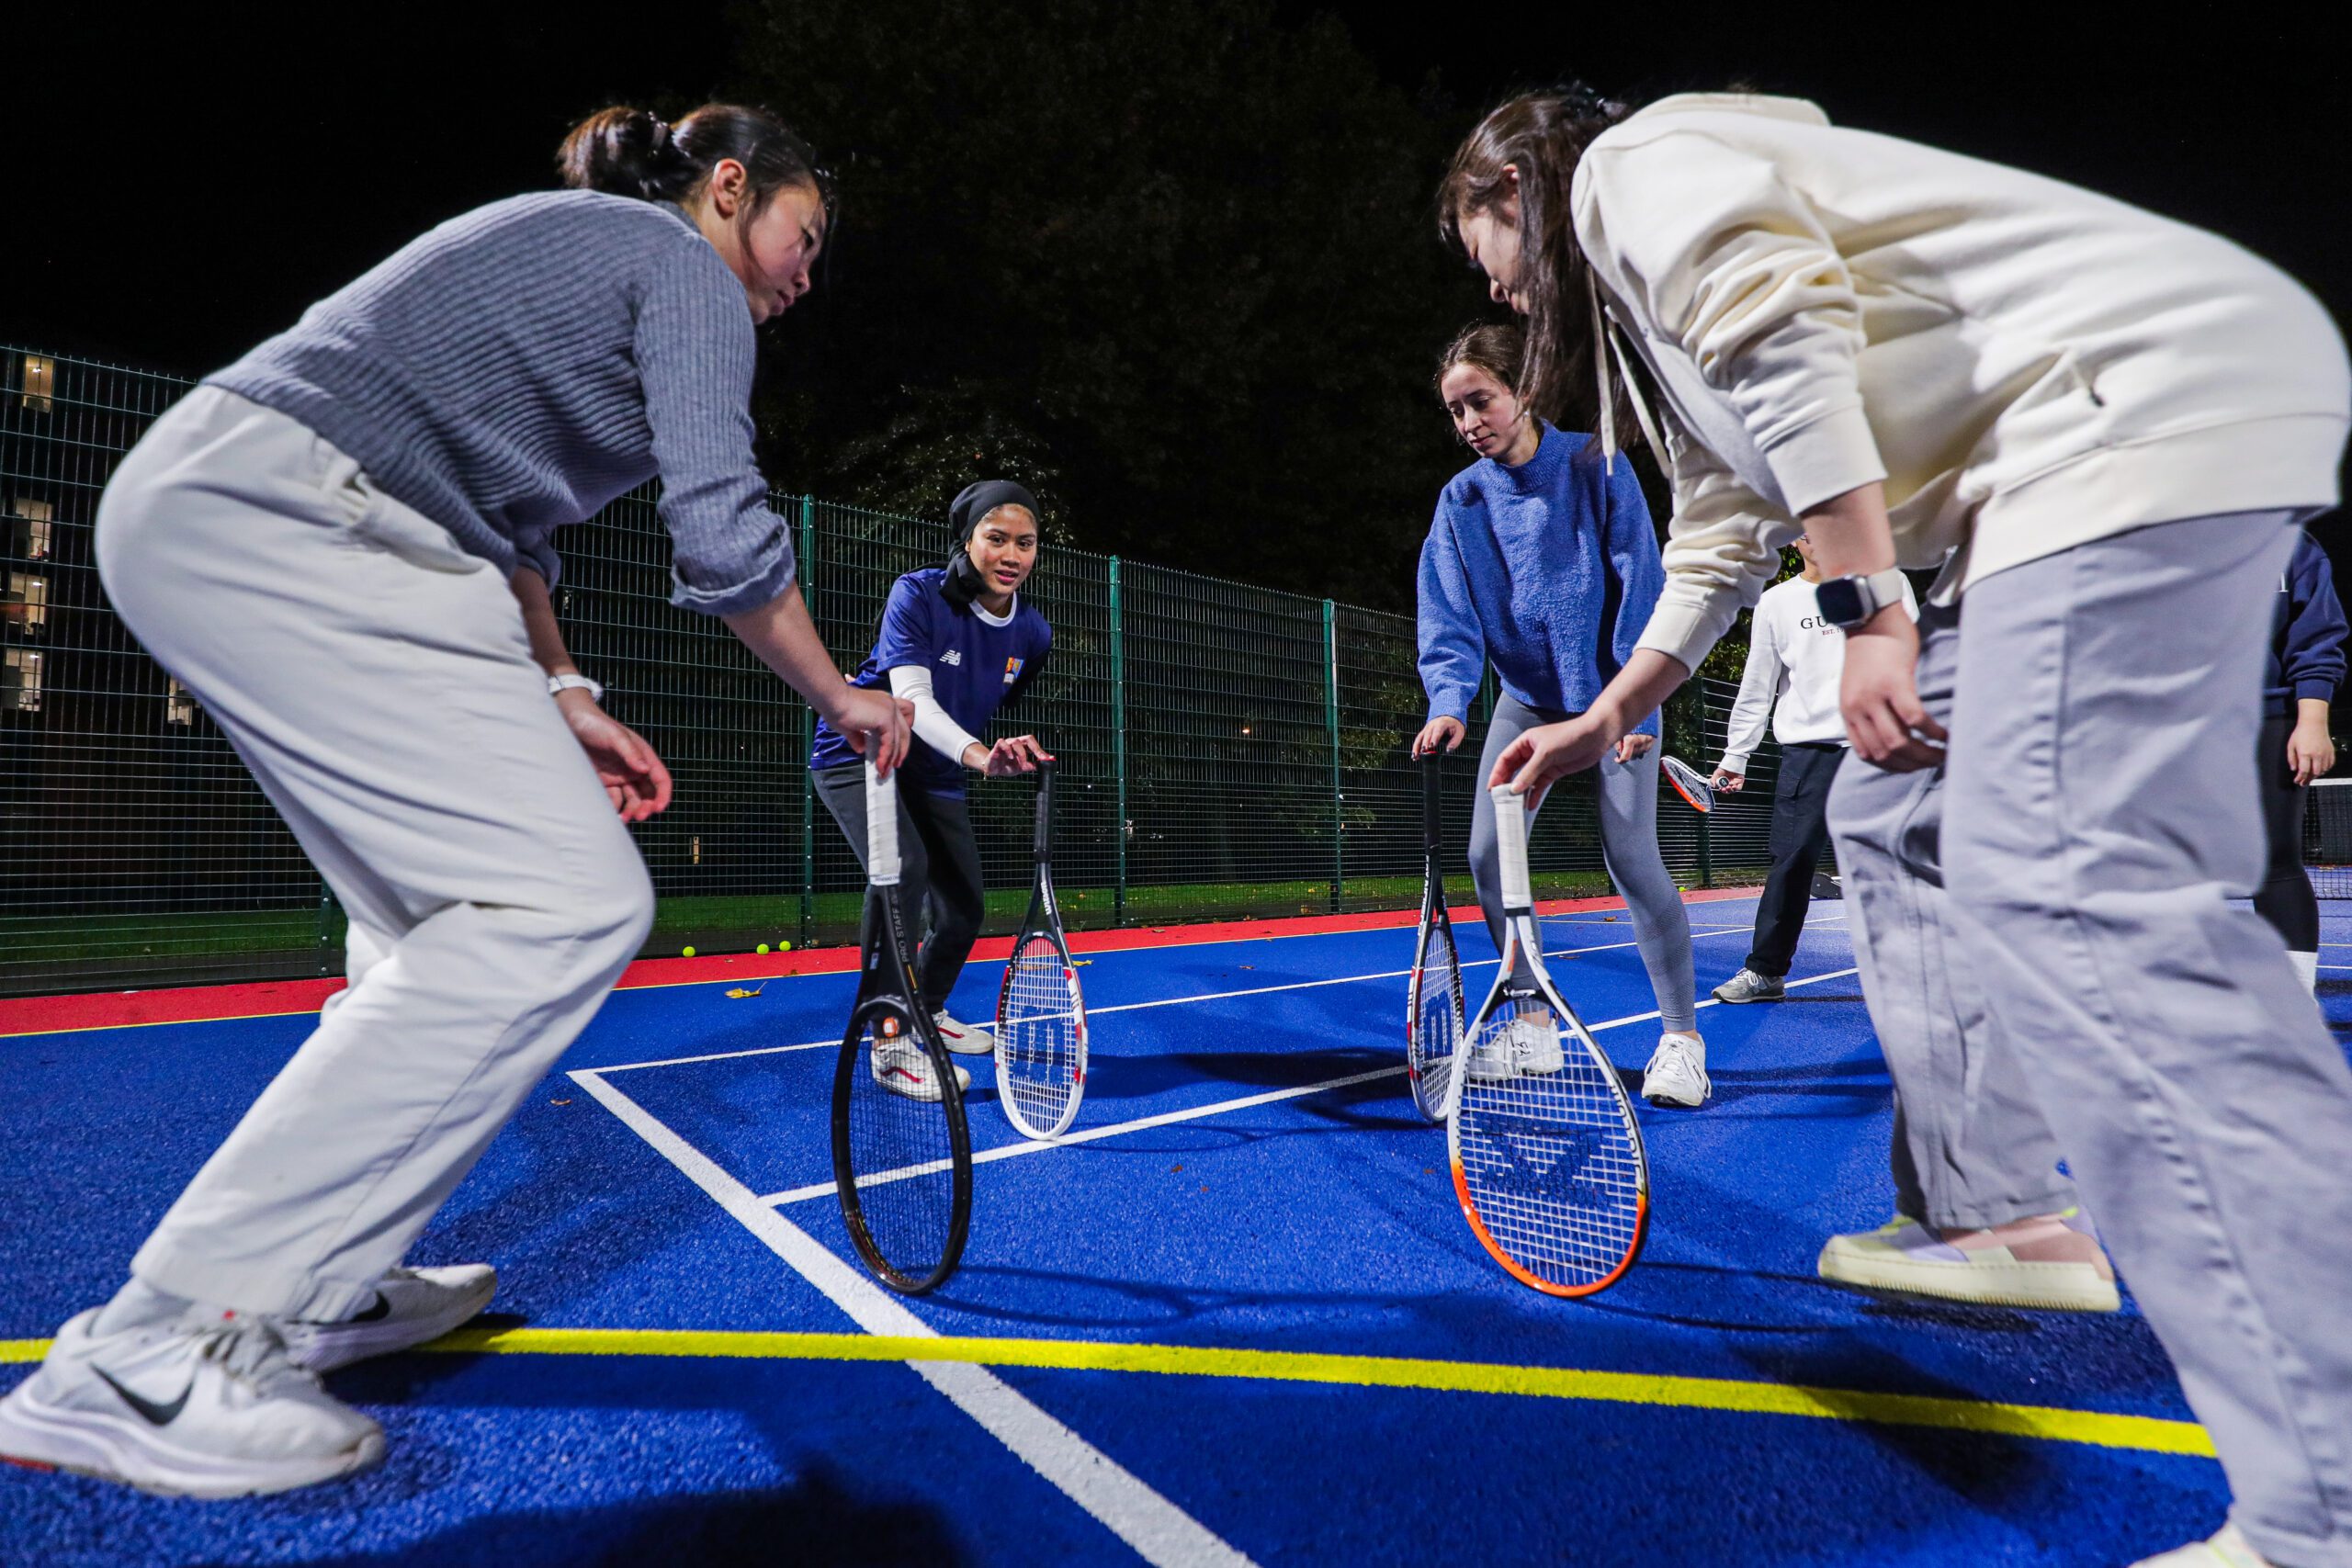 Four members of Active Residences taking part in tennis. They are stood in a circle and leaning on their tennis racquets.